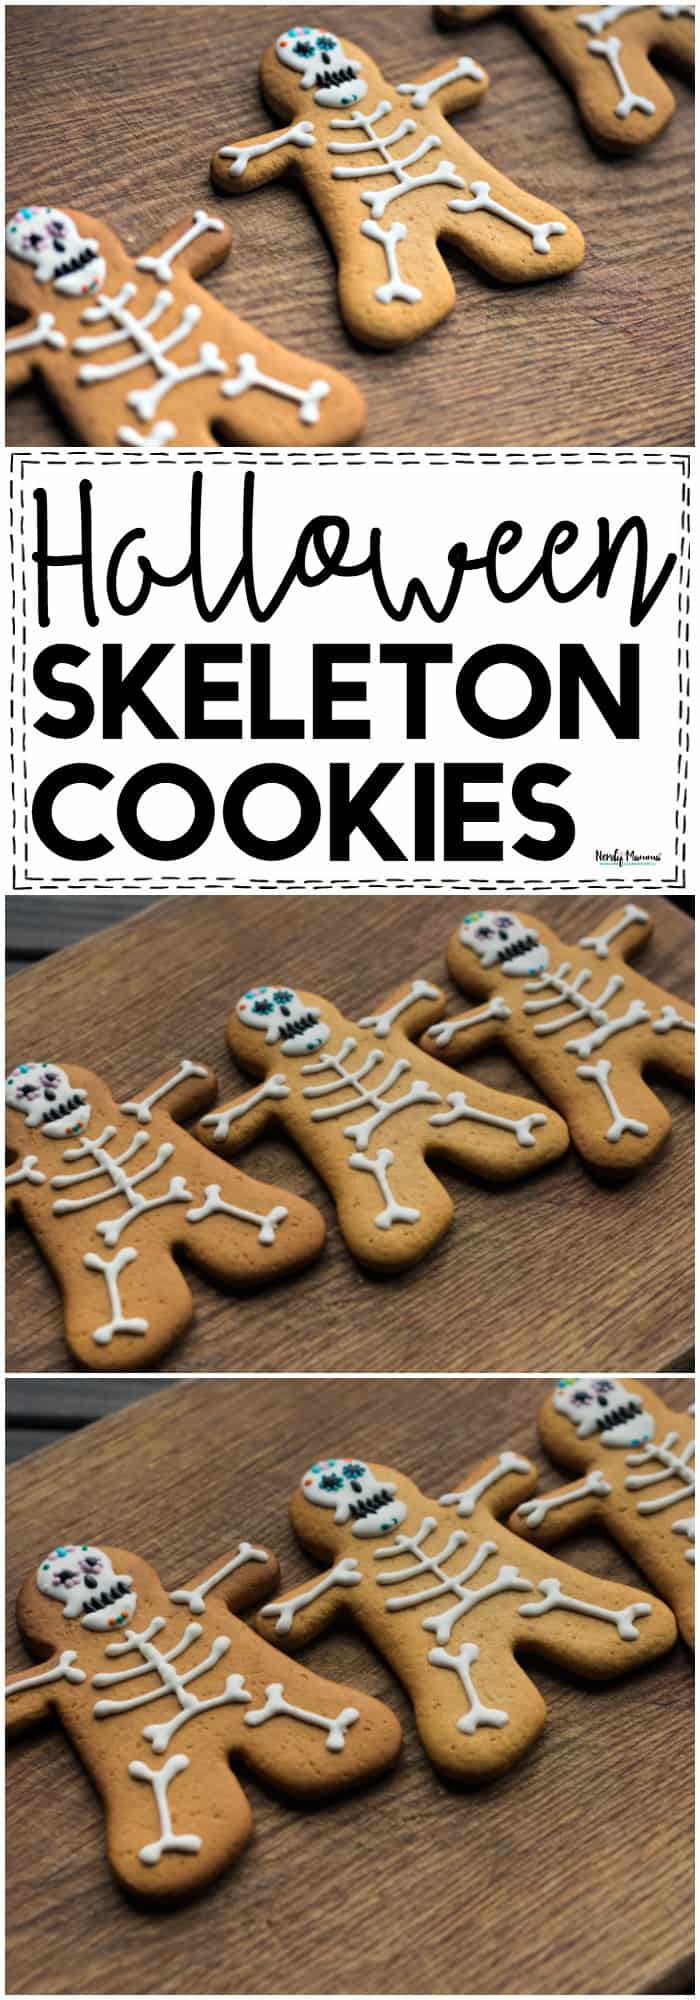 Check out these soft & delicious Halloween skeleton cookies! They're the perfect Halloween party treat or afternoon snack!